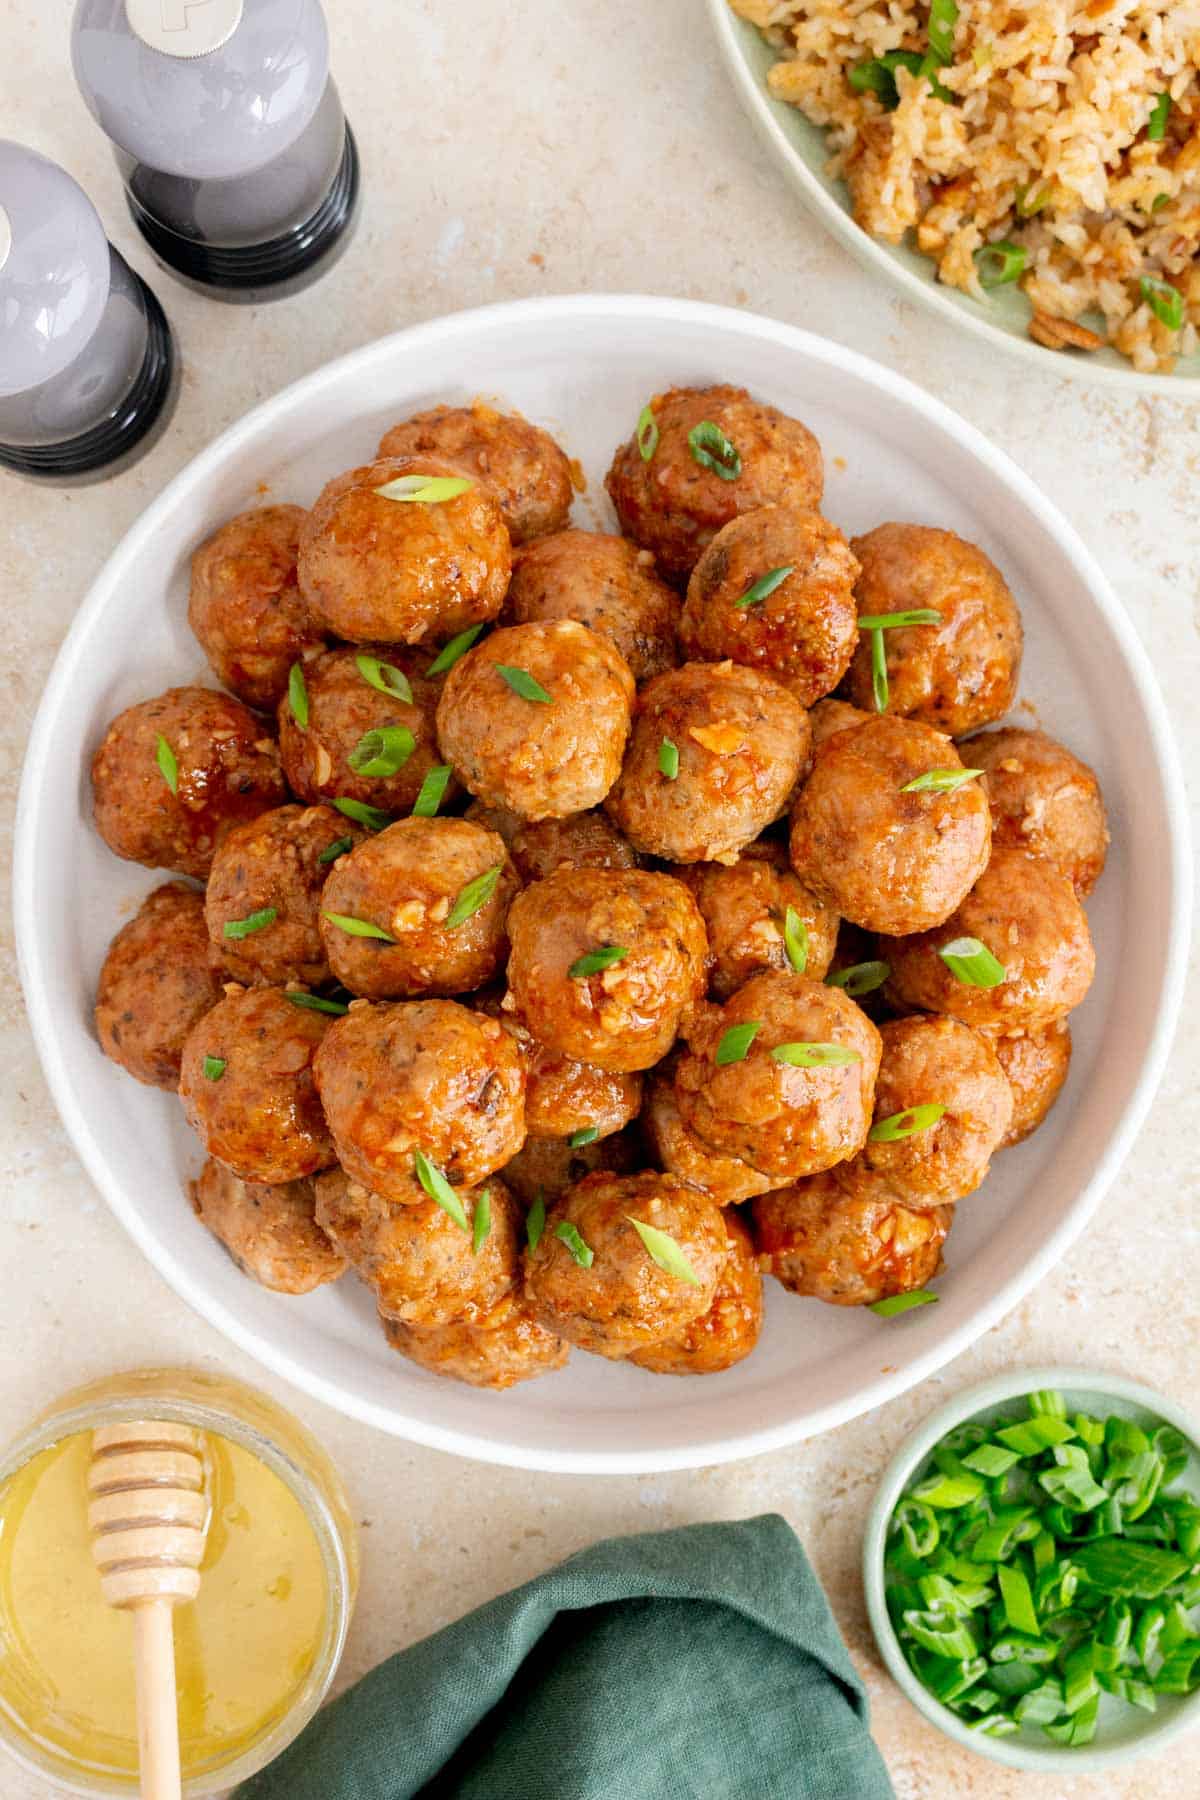 Overhead view of a plate of honey sriracha meatballs garnished with green onions.